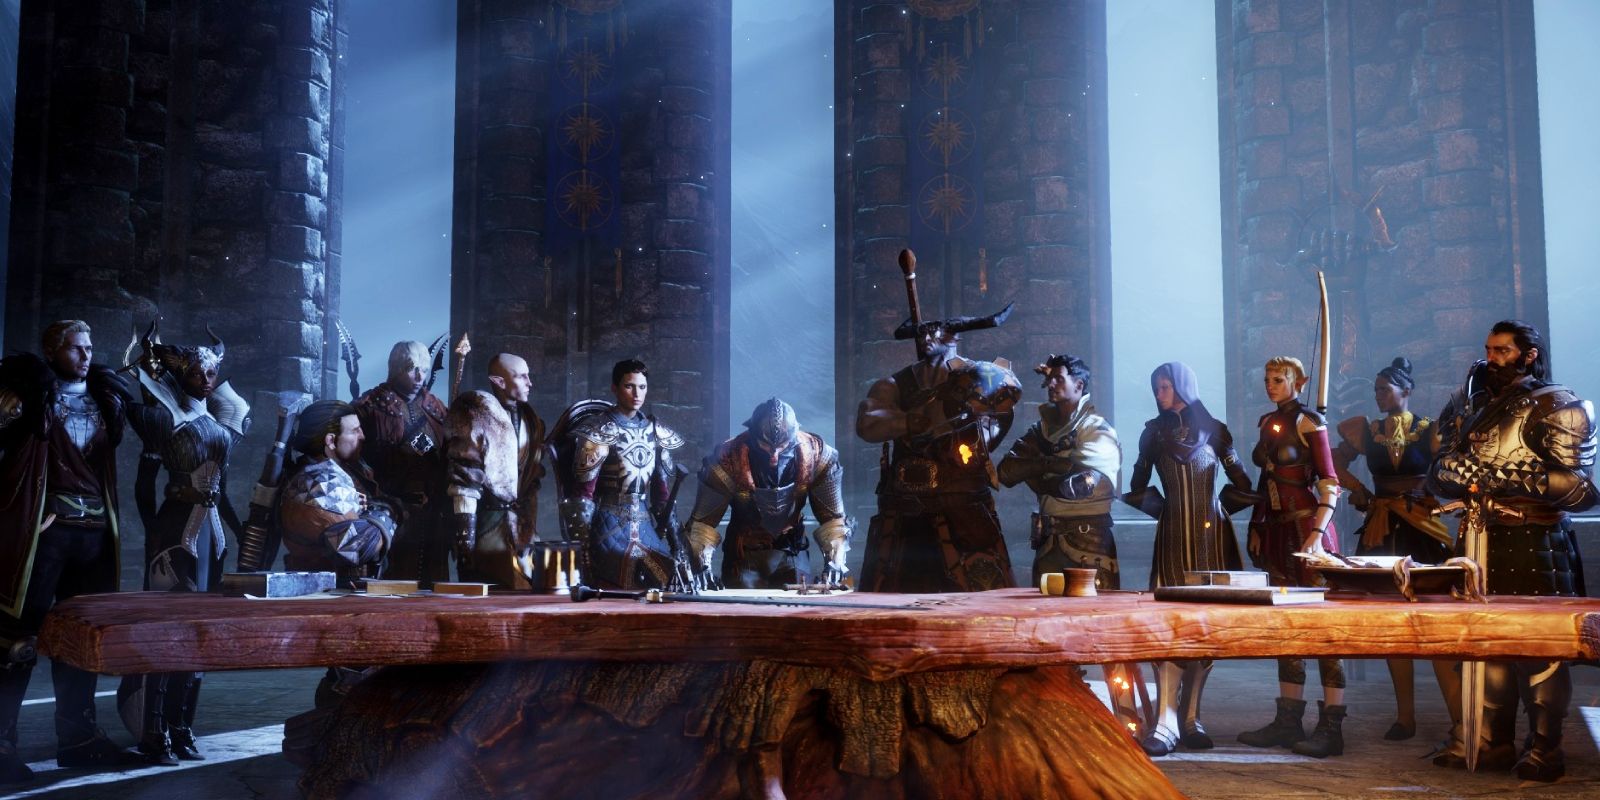 The main characters of Dragon Age Inquisition standing in the shadows